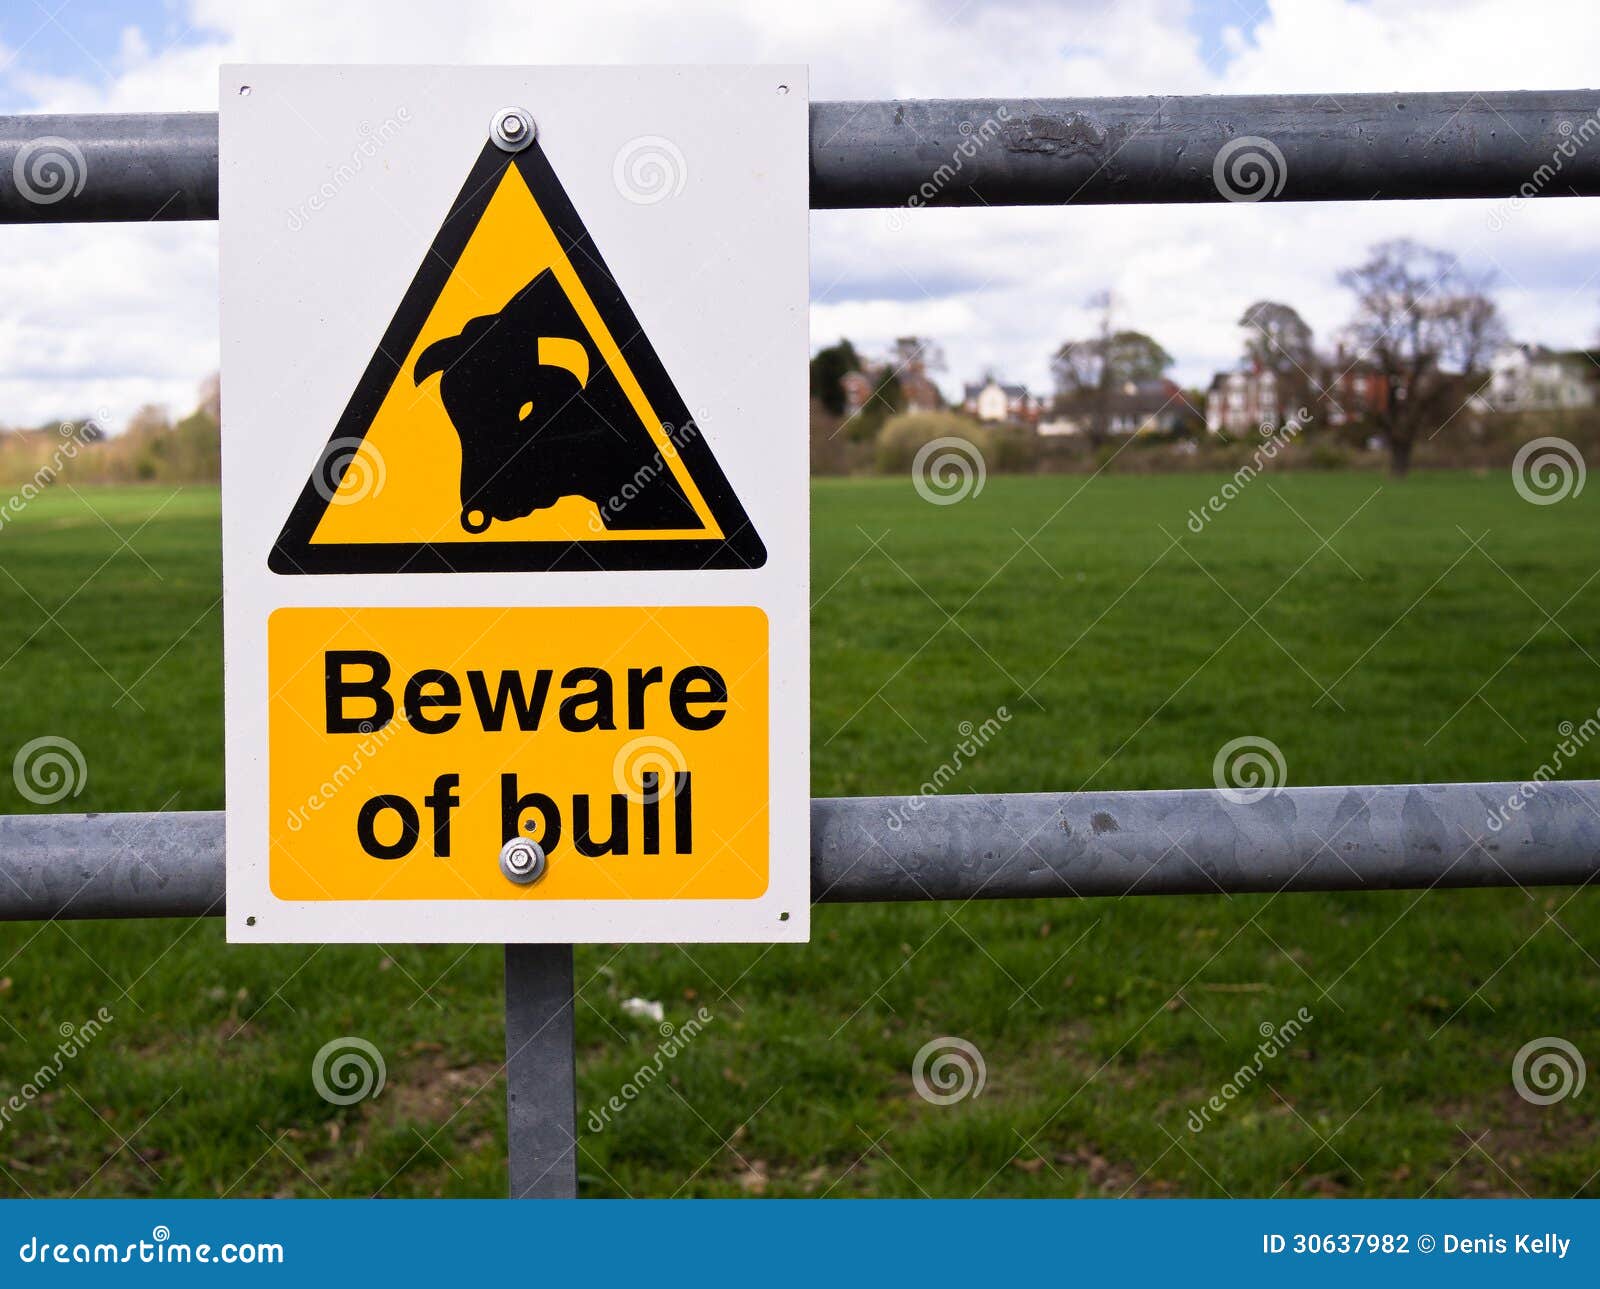 Beware of the bull safety sign Sticker Farming warning trailer box 3 Sizes 